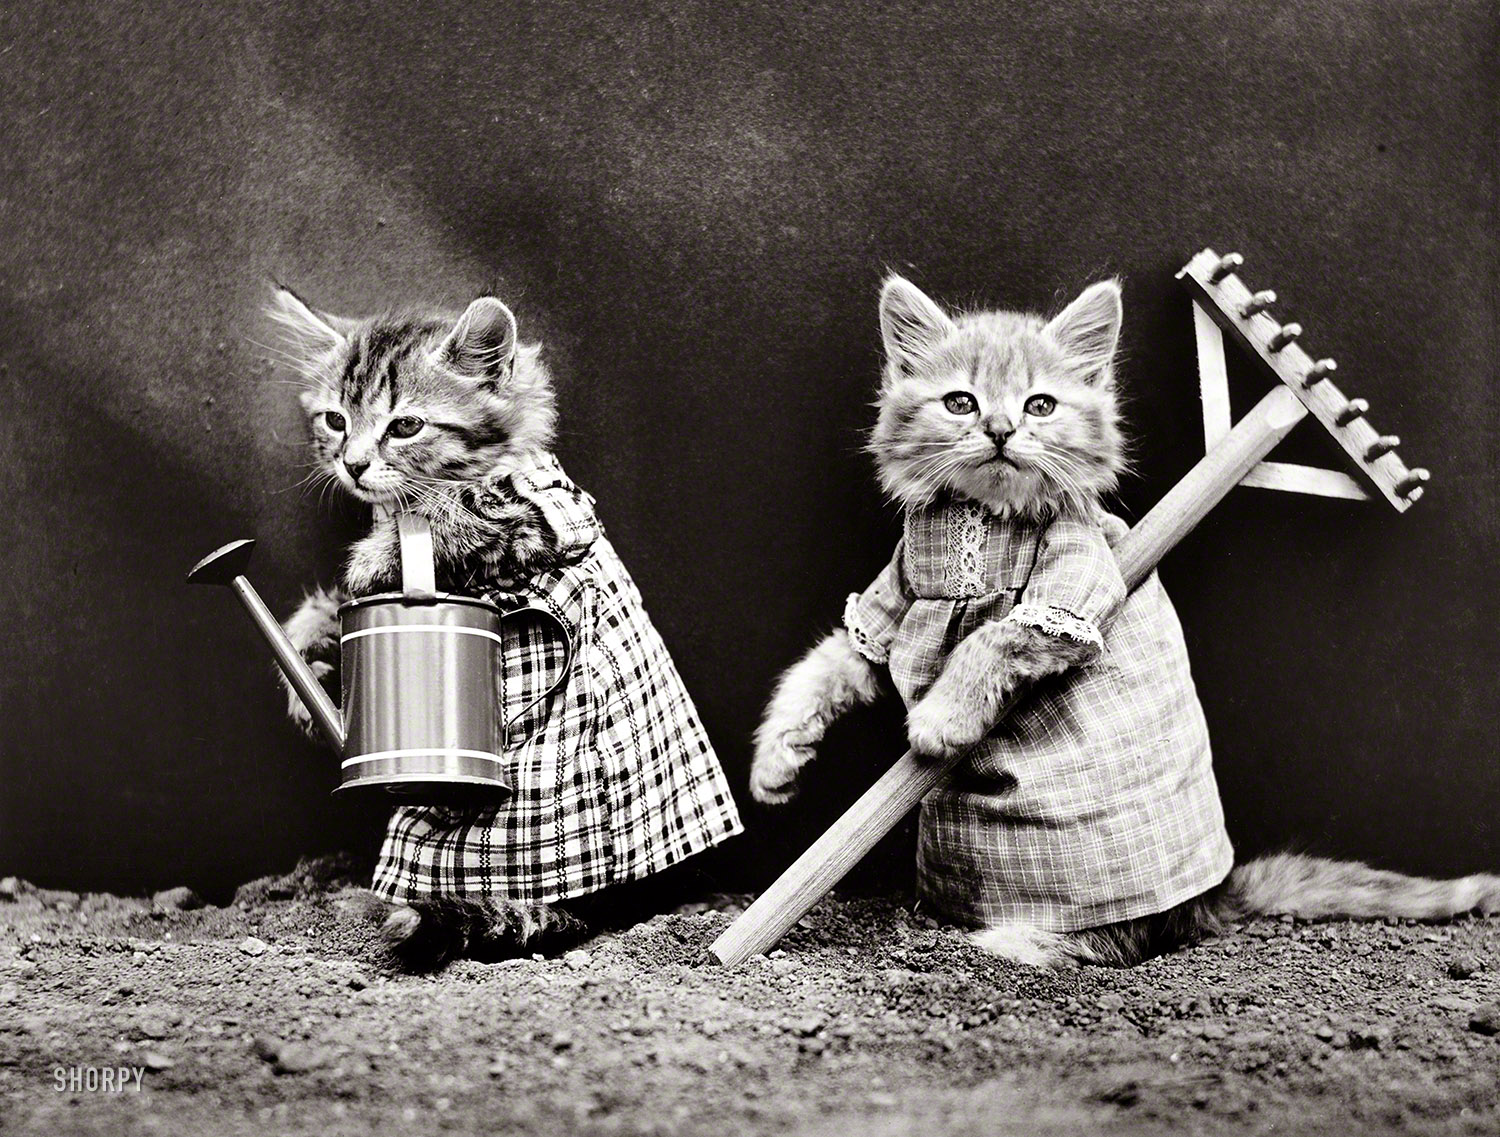 1914. "Cats in costume carrying watering can and garden rake." Photo by Harry Whittier Frees, the Ansel Adams of feline portraiture. View full size.